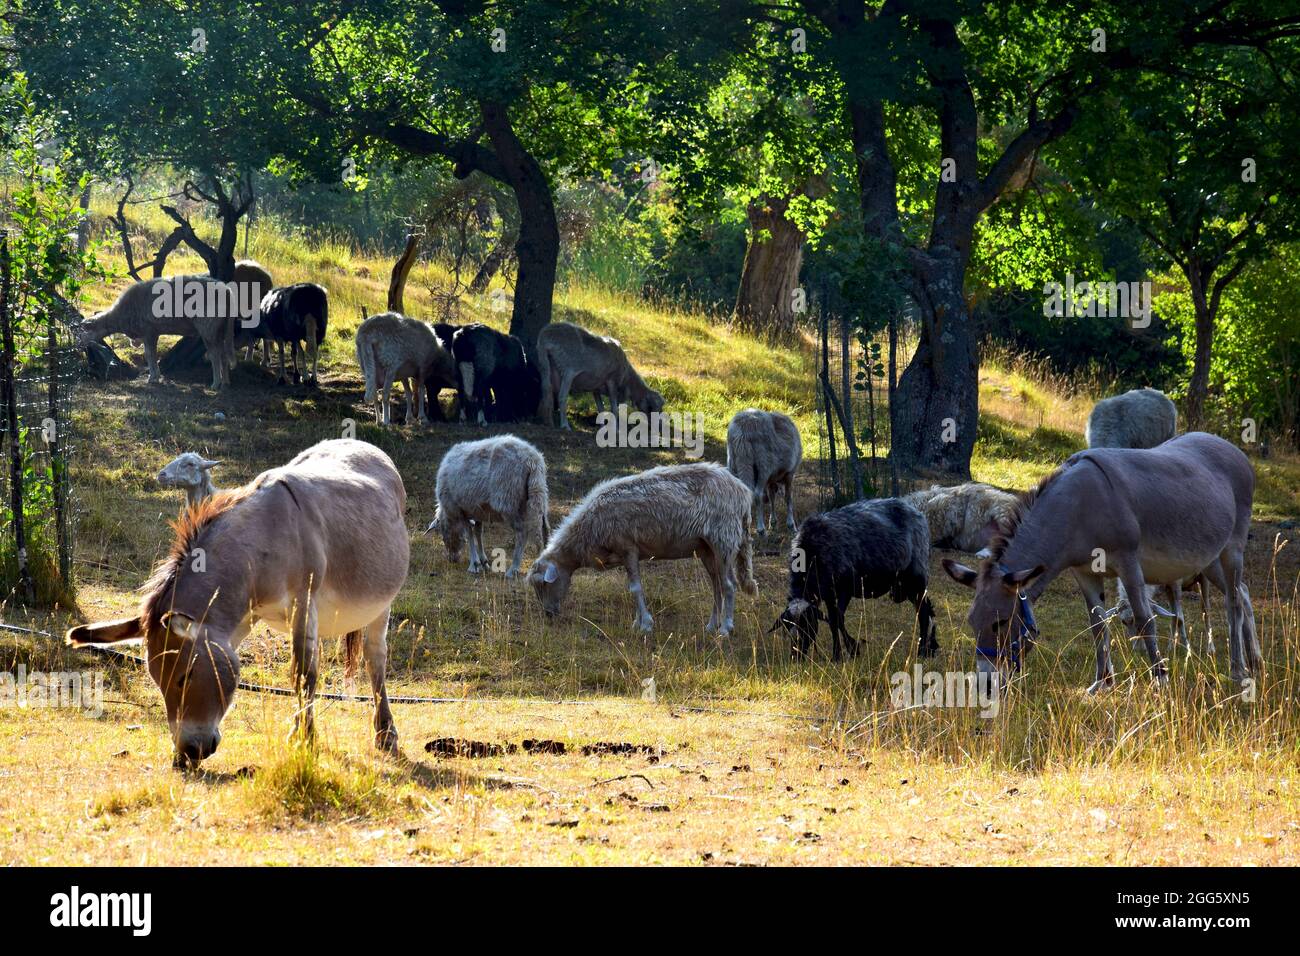 Donkeys and sheep grazing in a field Stock Photo